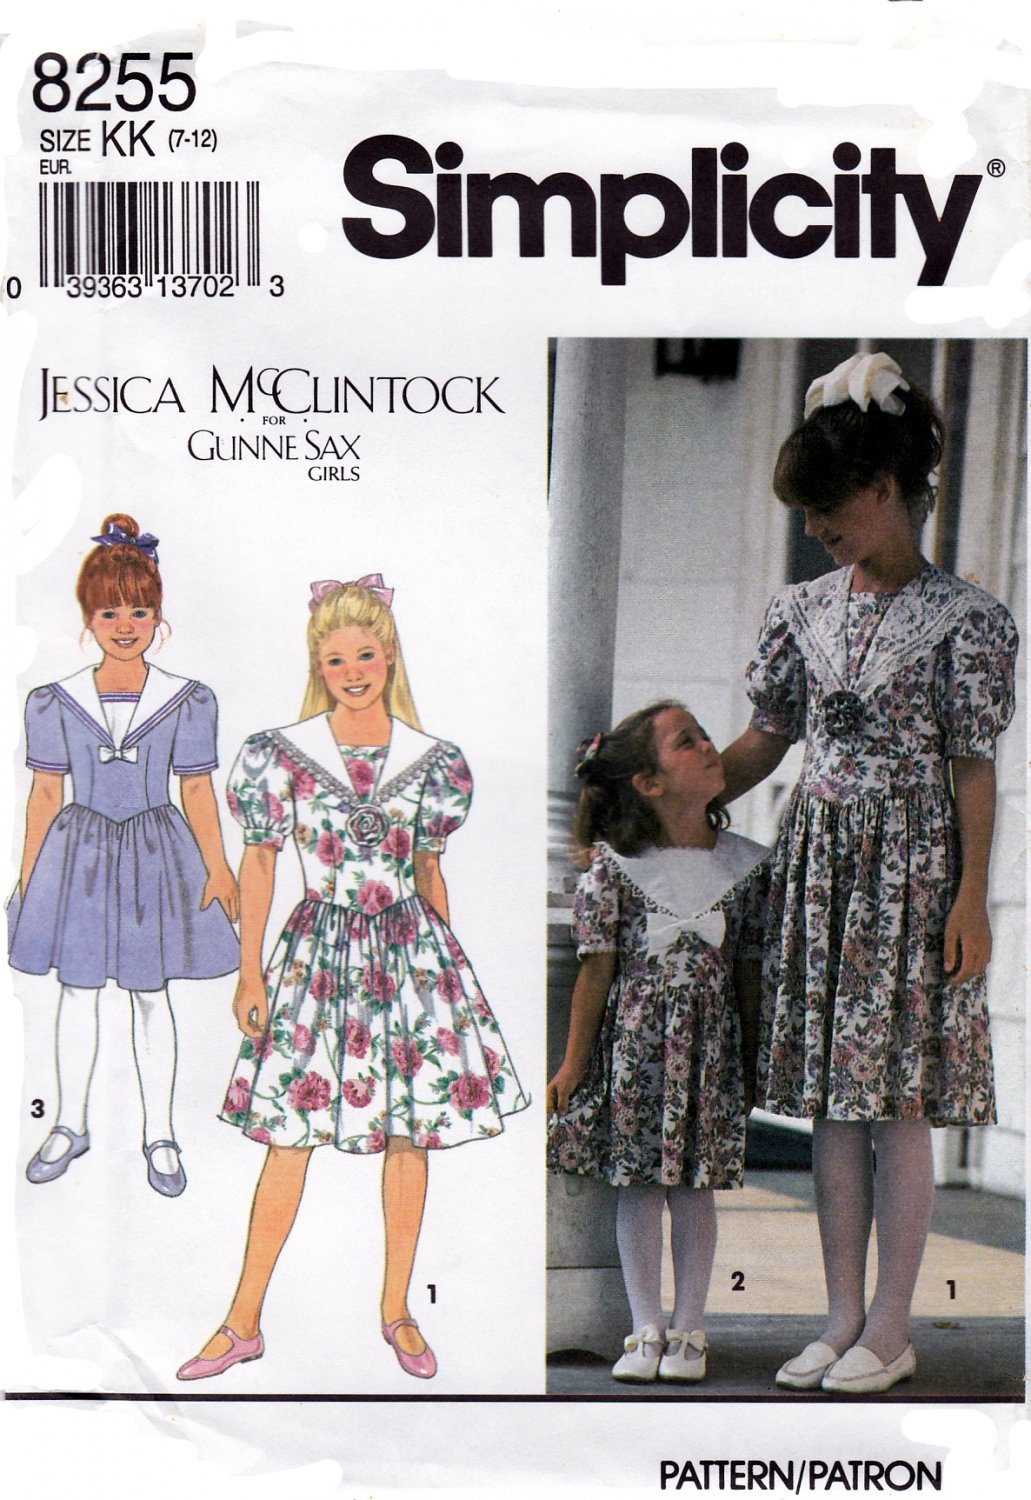 Simplicity 8255 Girls Childs Dress Knee Length Sewing Pattern Sizes 7-12